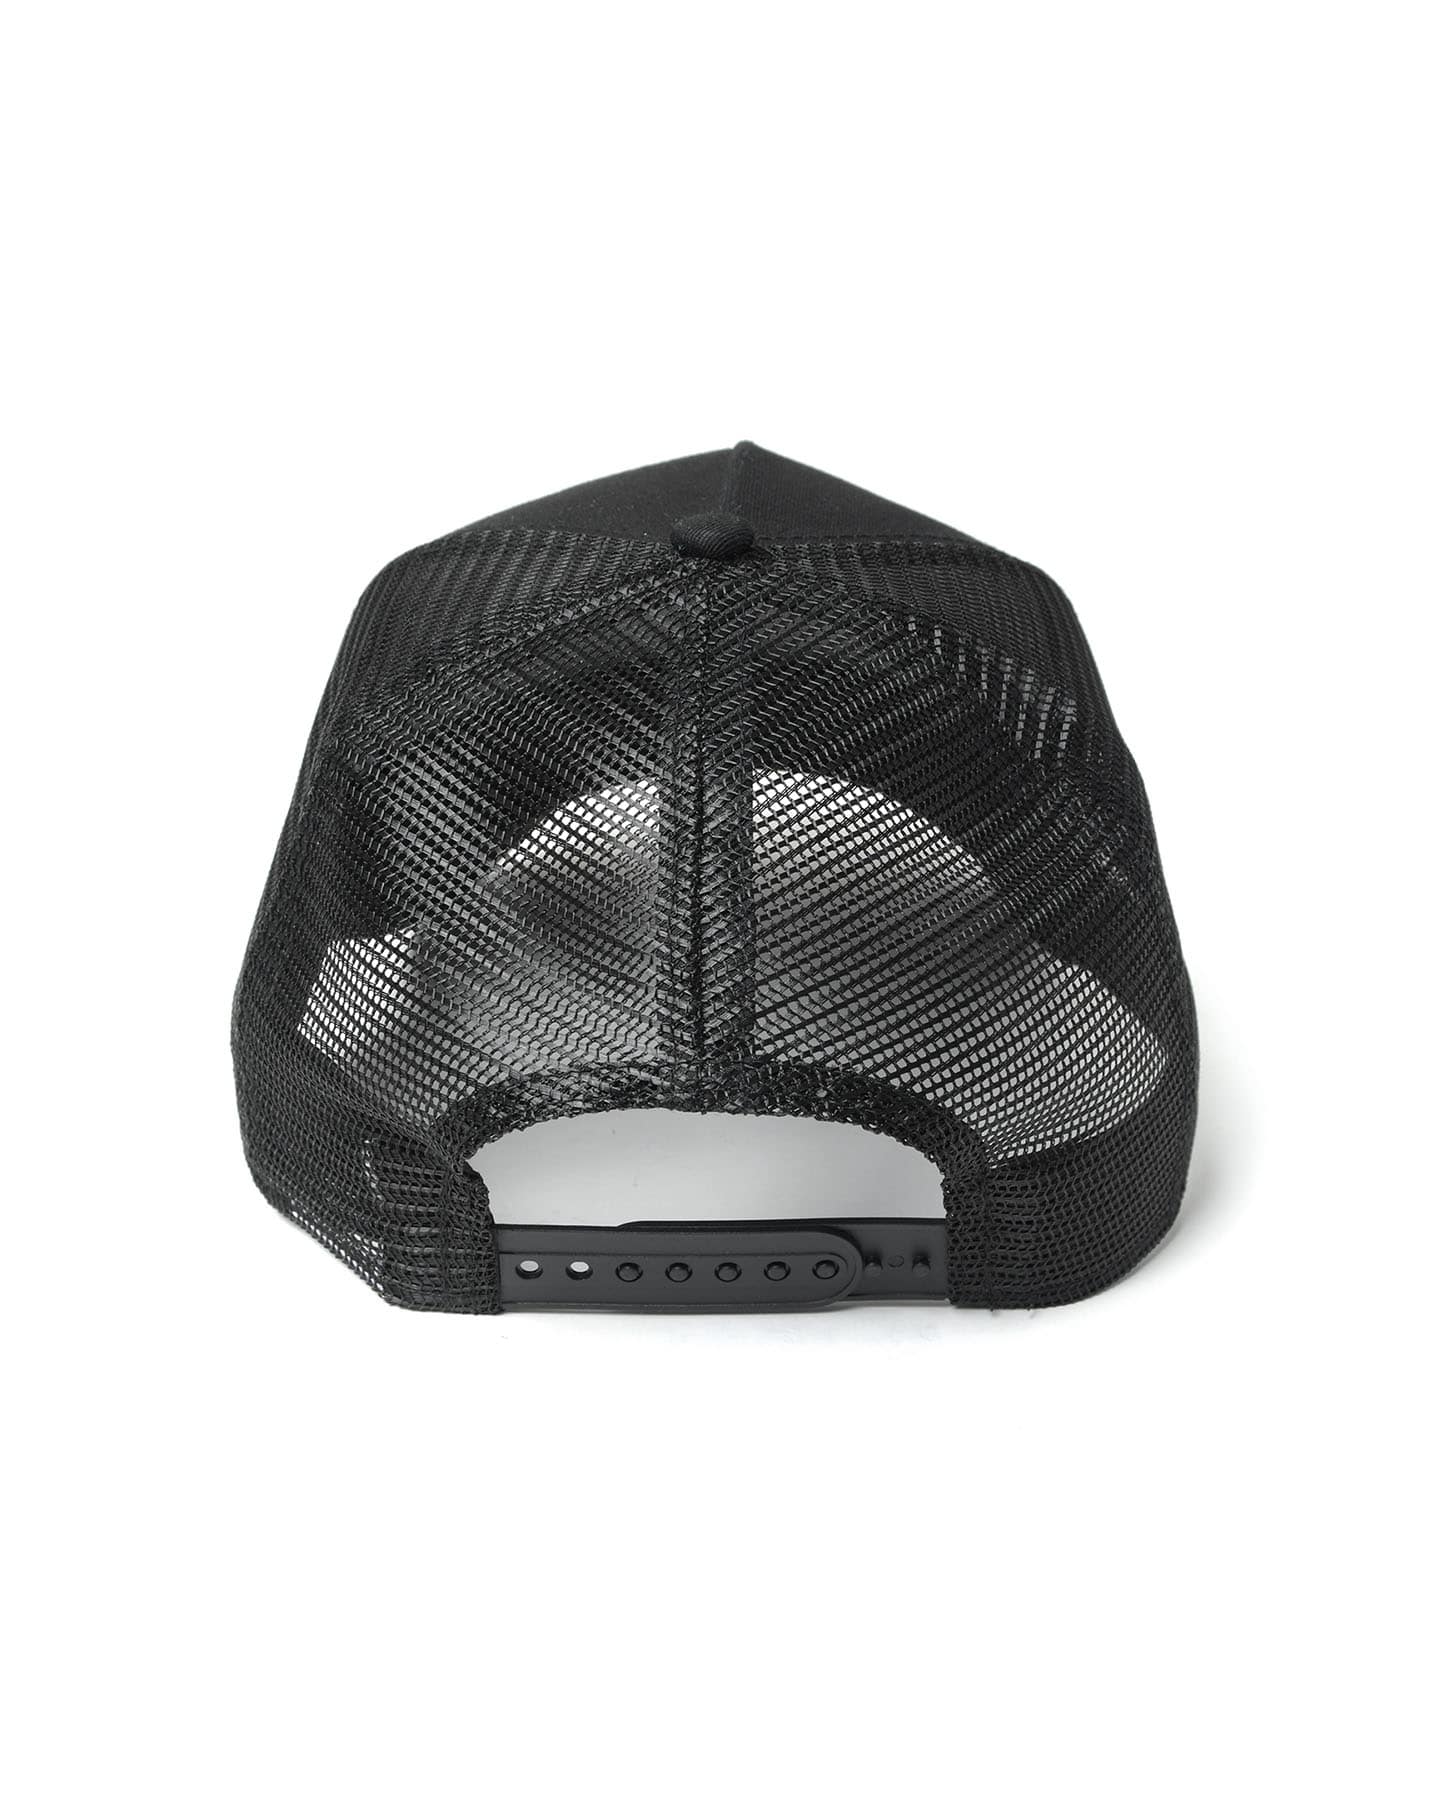 FCRB NEW ERA 9FORTY A-FRAME MESH CAP